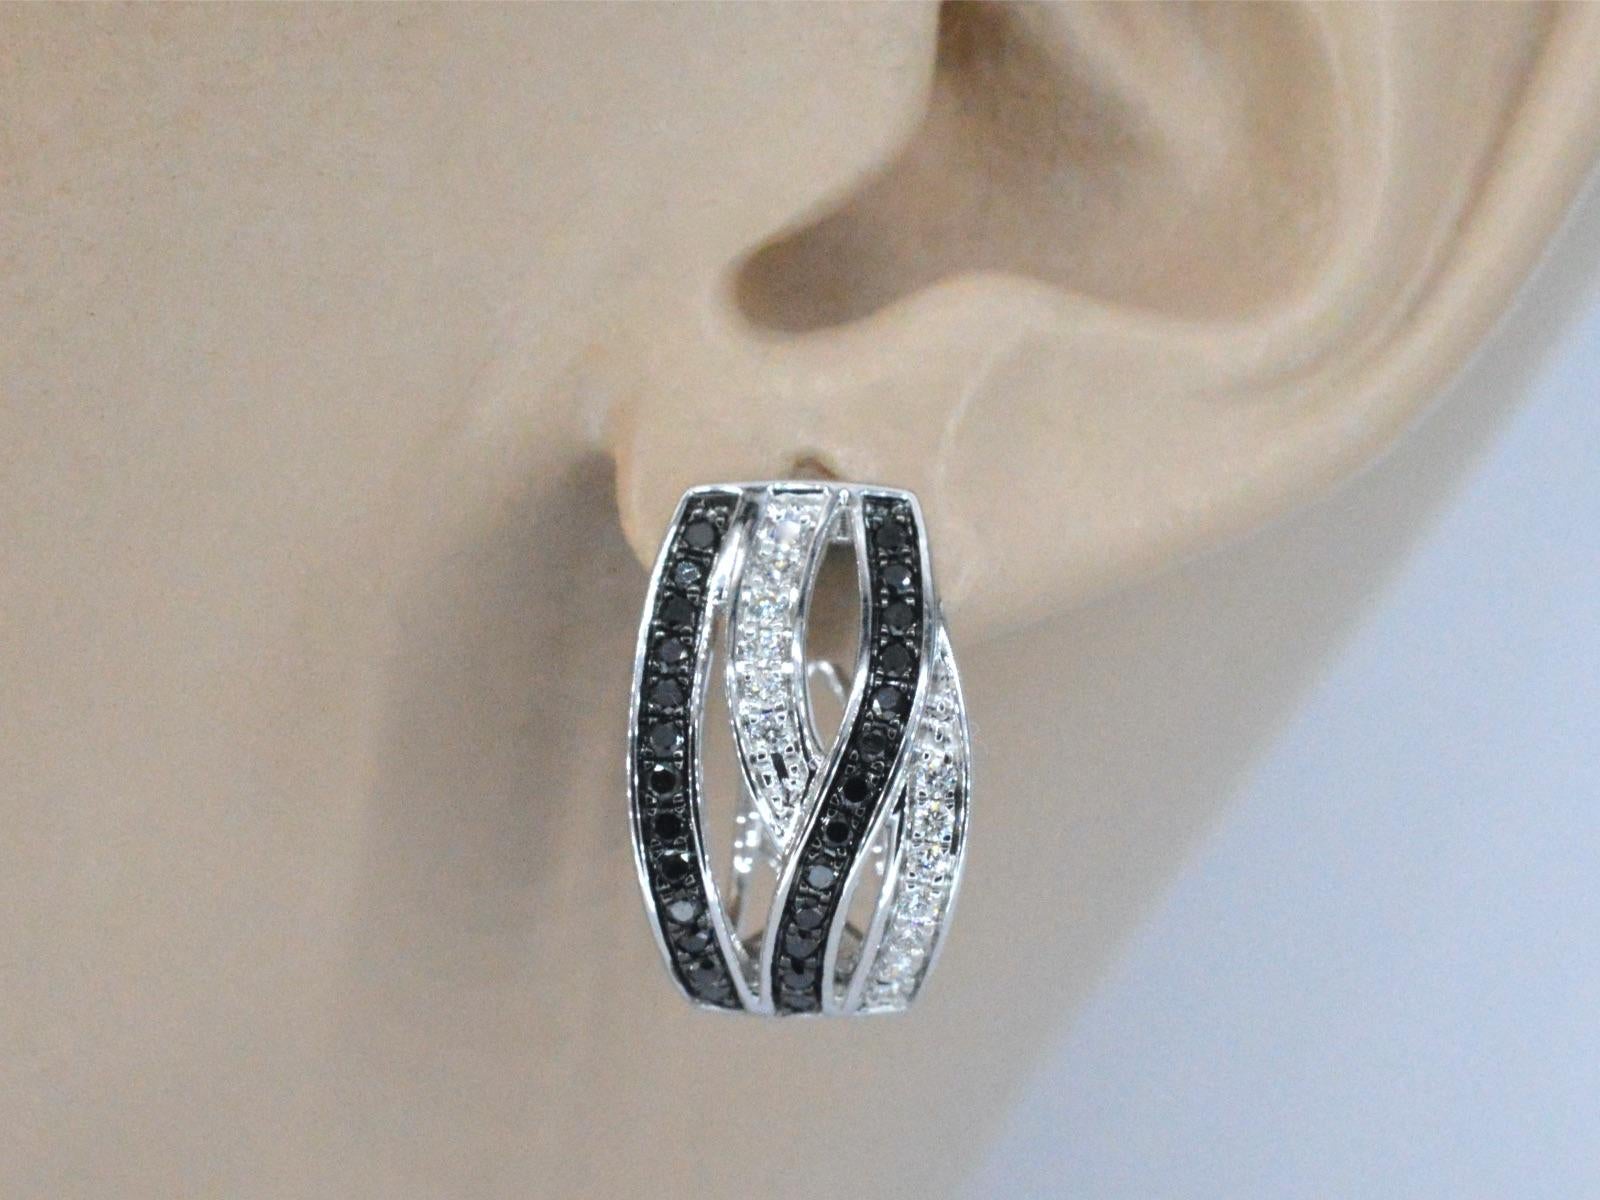 These 18K white gold earrings are a unique and stylish design featuring a combination of white and black brilliant diamonds of high quality. The white gold is a premium quality metal that is highly lustrous and durable. The diamonds used in the